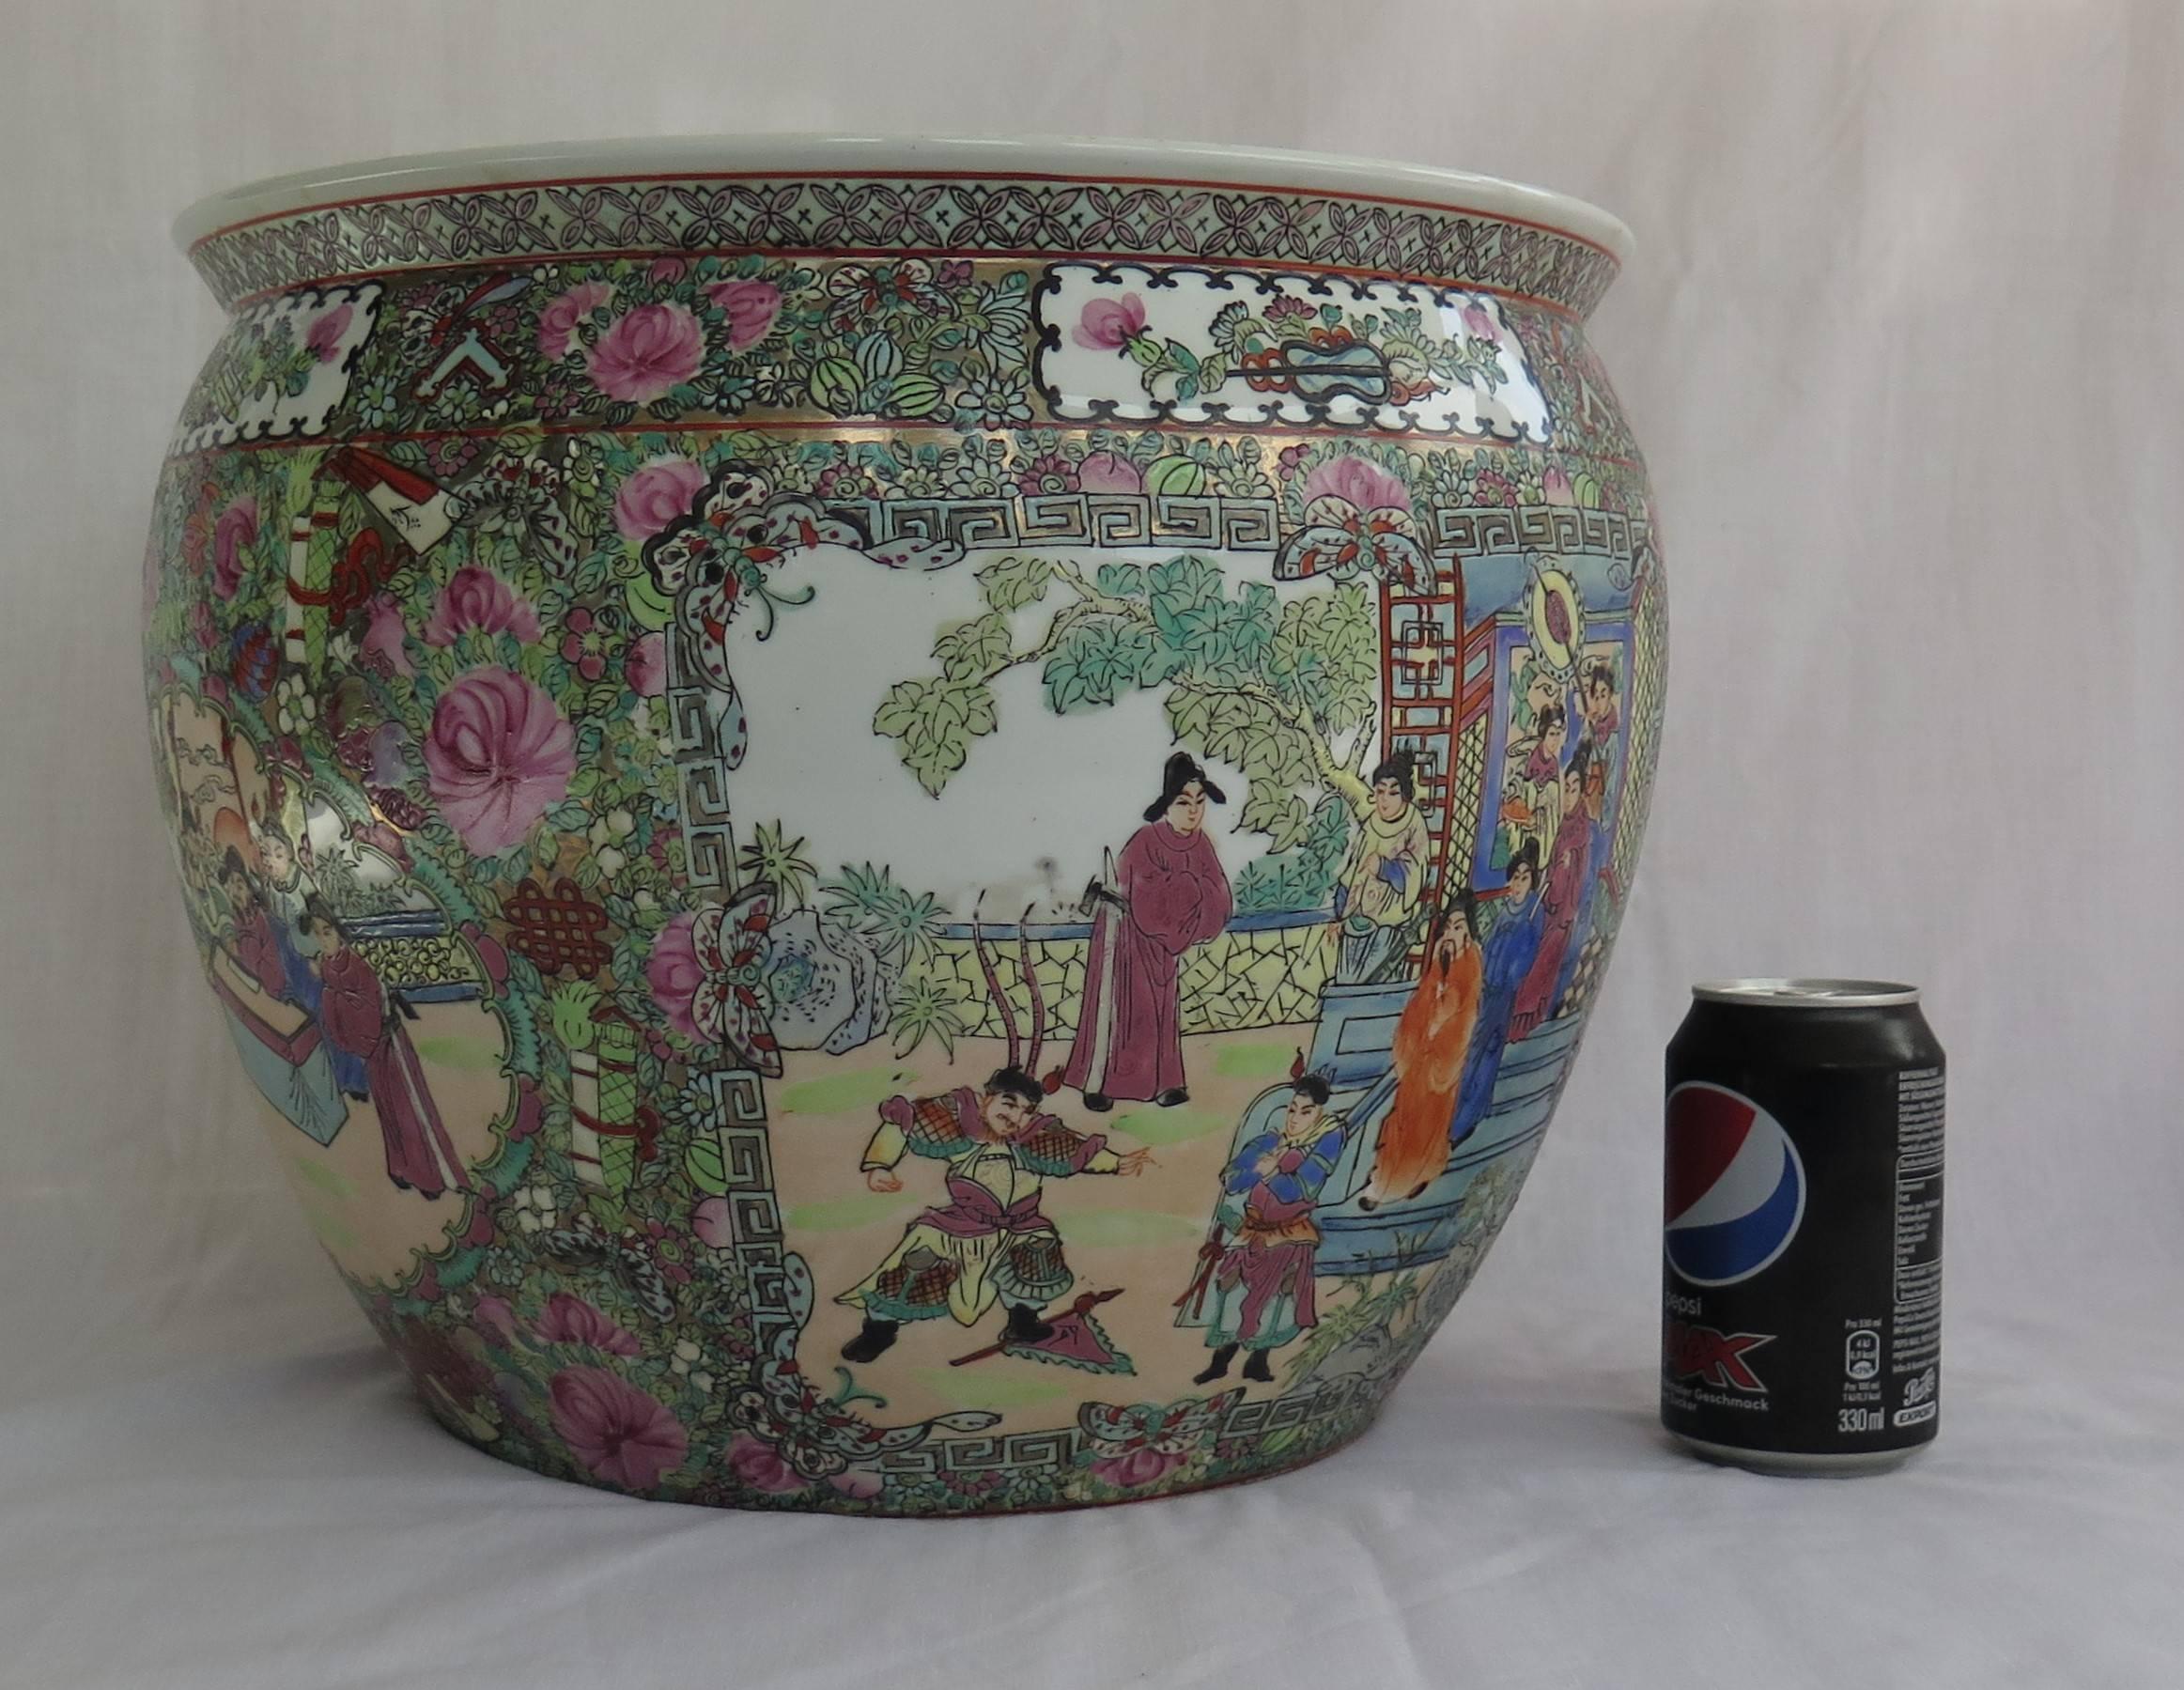 This is a good, large, Chinese Export porcelain Fish Bowl or Cachepot (Jardiniere).

It is hand decorated in the Canton, 